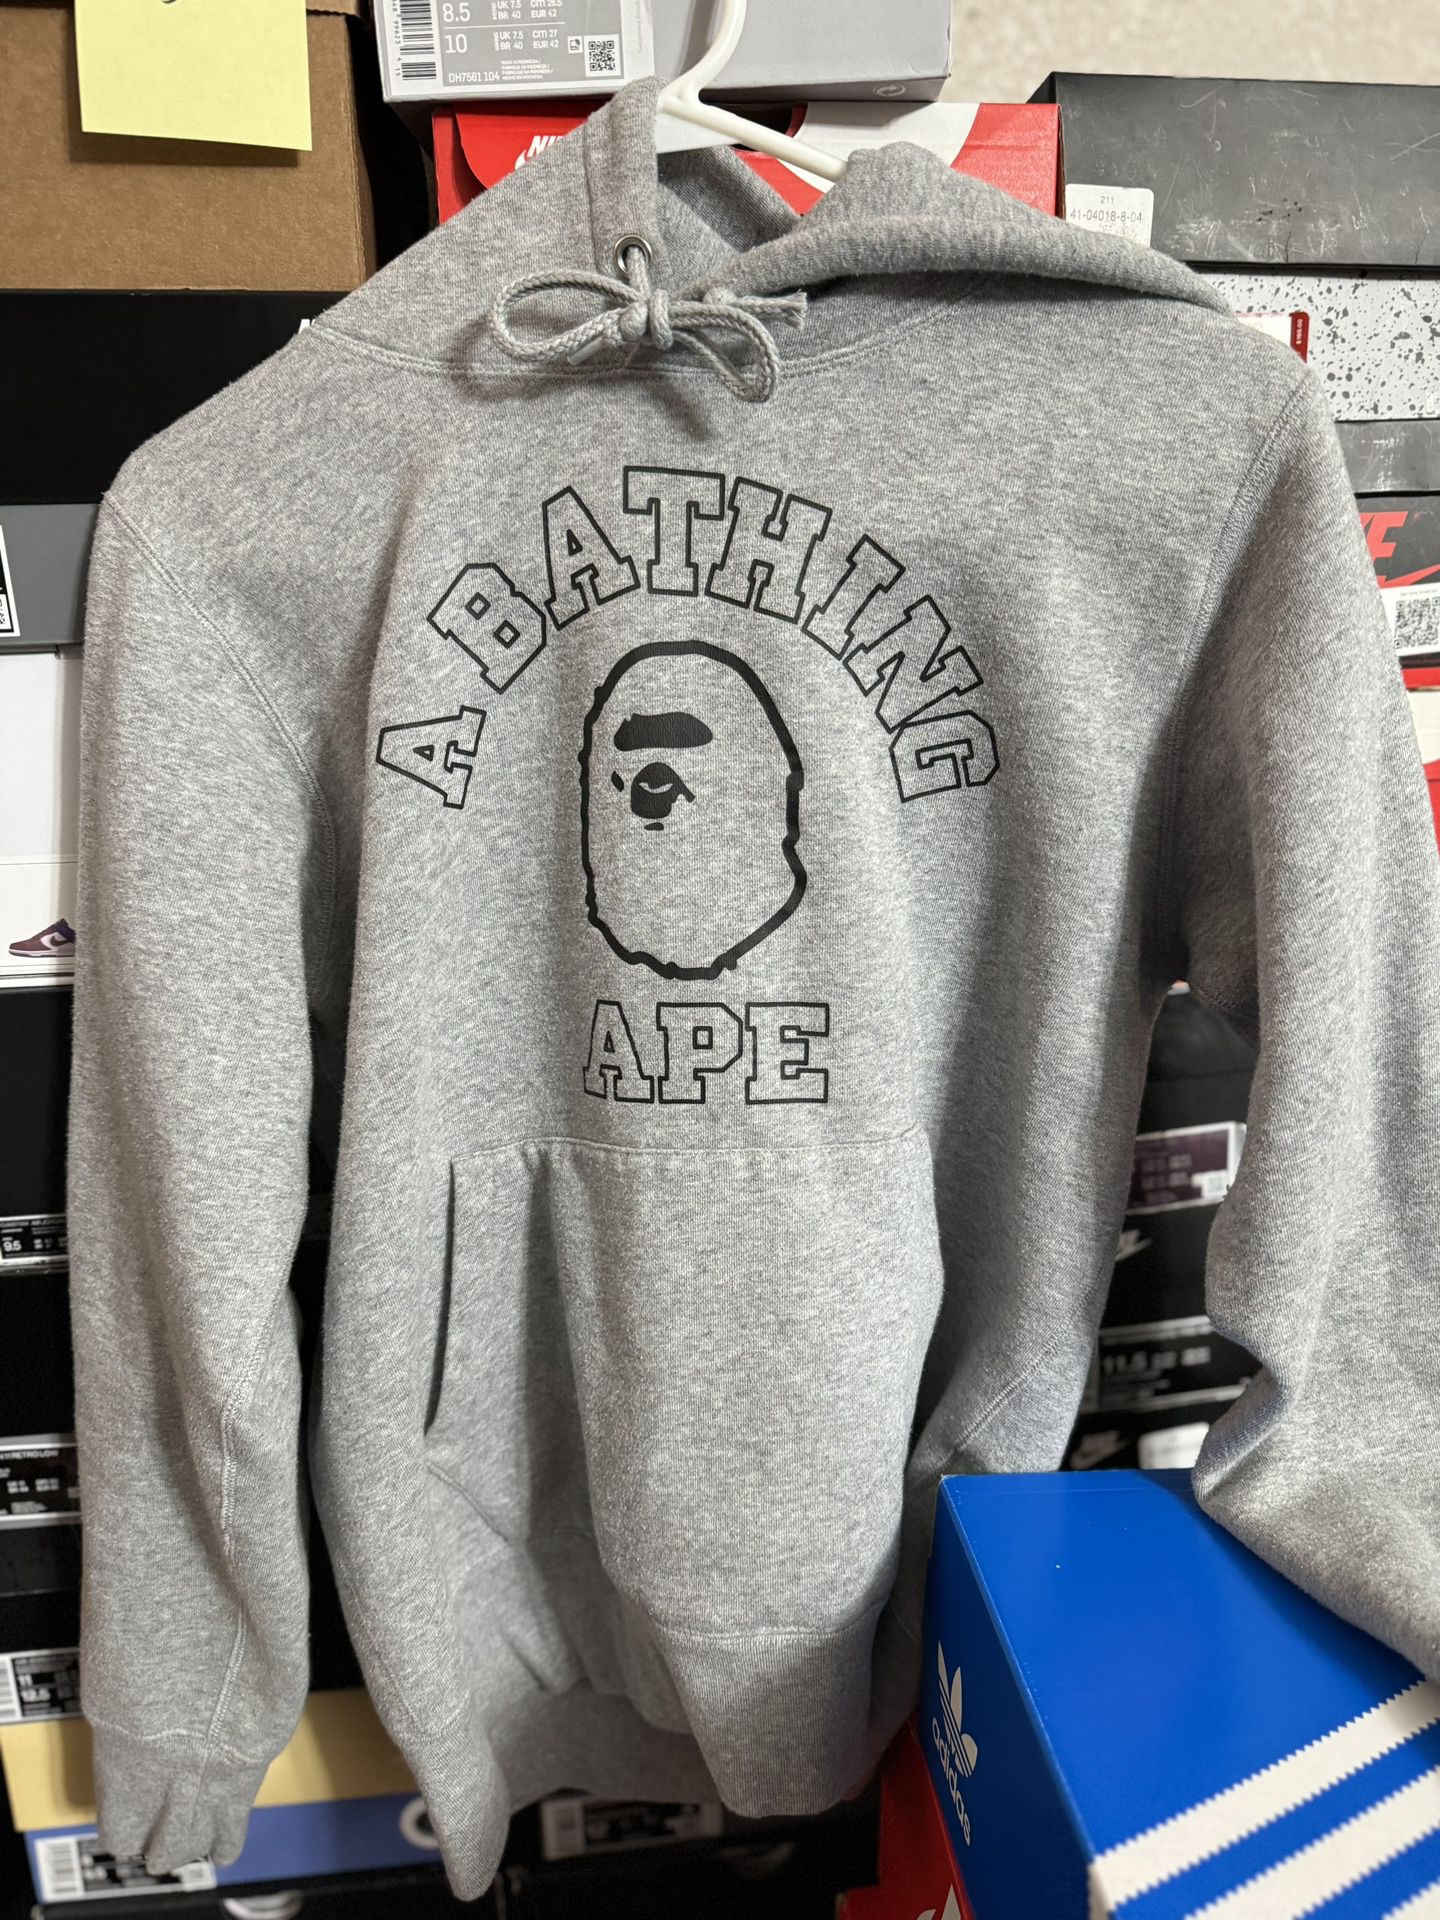 Bape College Logo Pullover Hoodie Grey size M USED But Clean $200